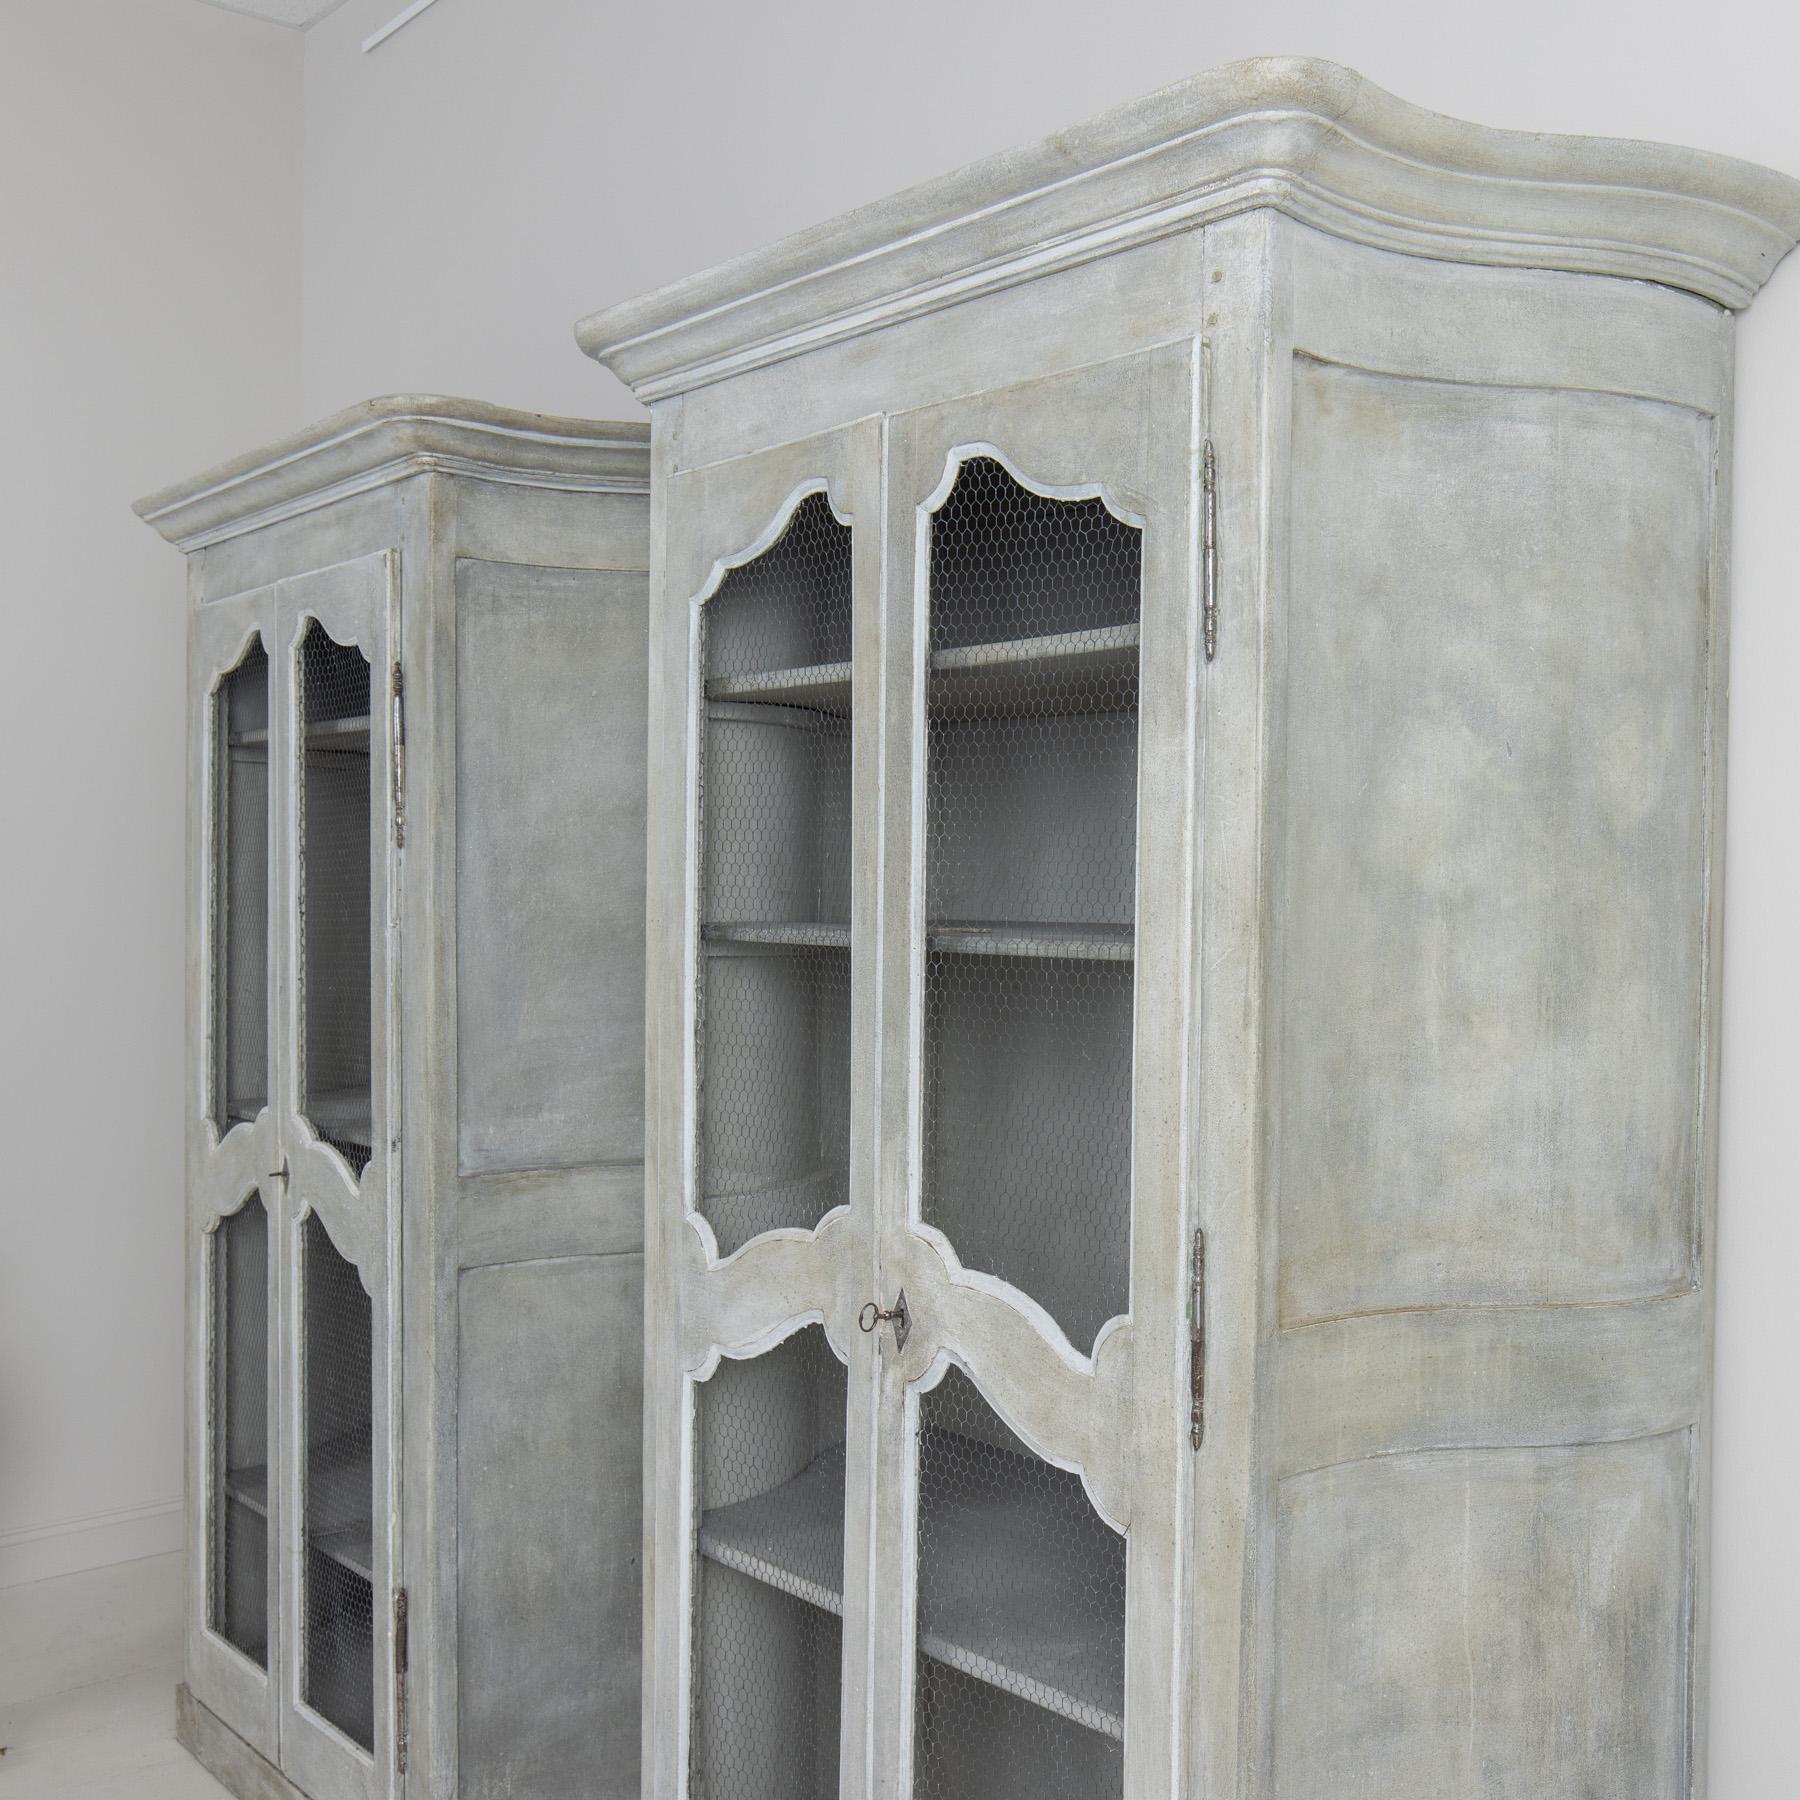 19th c. Pair of French Gray Painted Armoire Cabinets with Serpentine Sides For Sale 3